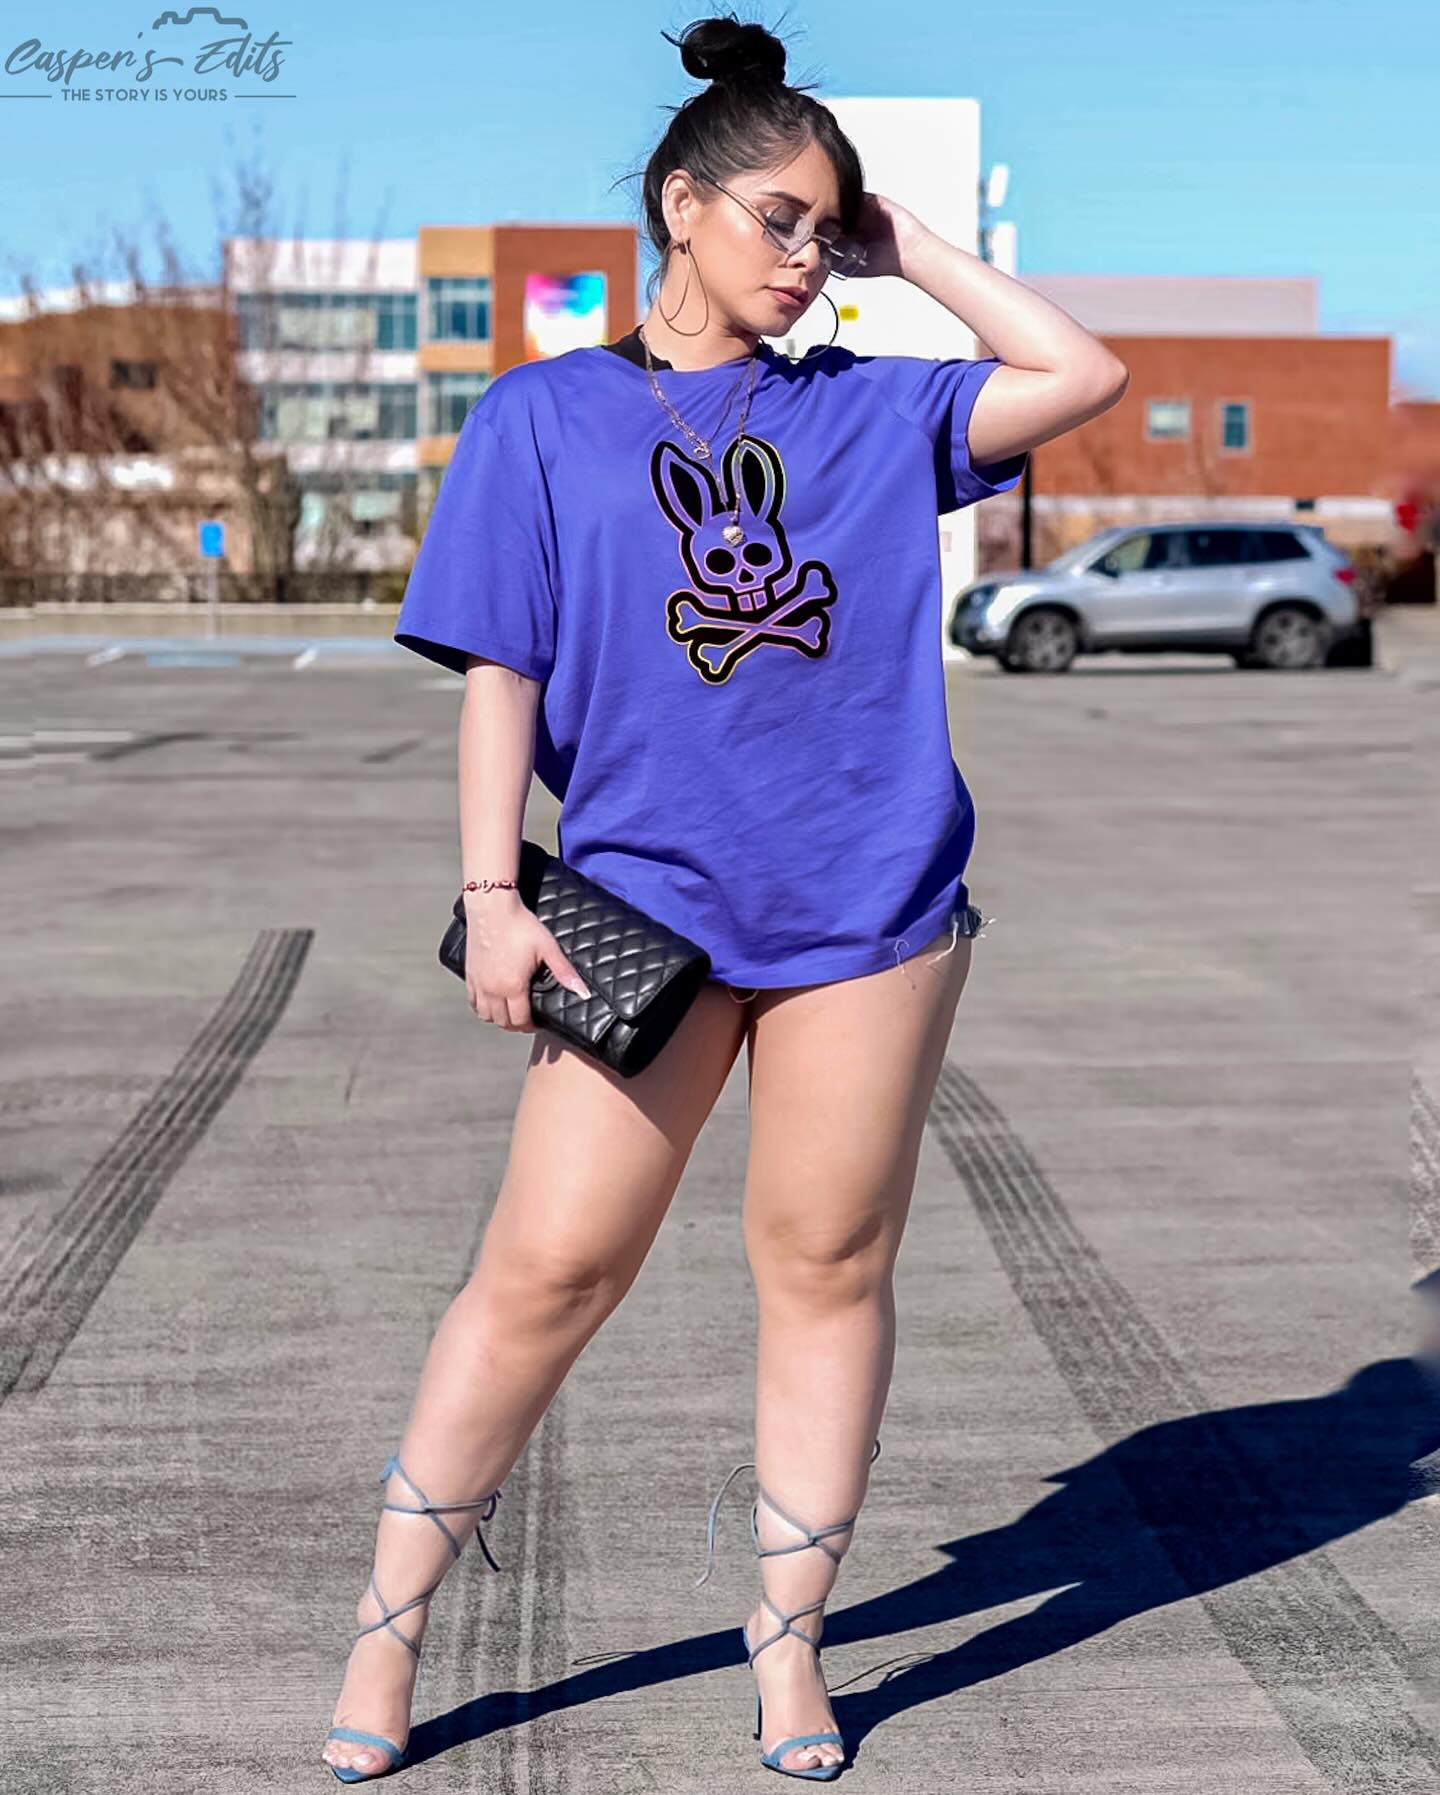 One Of My Favorite Photoshoots 😍 

What You Guys Think Leave your comments 👇👇👇

Happy Friday ..!!!😘🫶
.
📸 @caspersedits 🥰
.
.
#friday #weekend #fashion #latina #modeling #ootd #portland #oregon #goodvibes #streetphotography #portrait